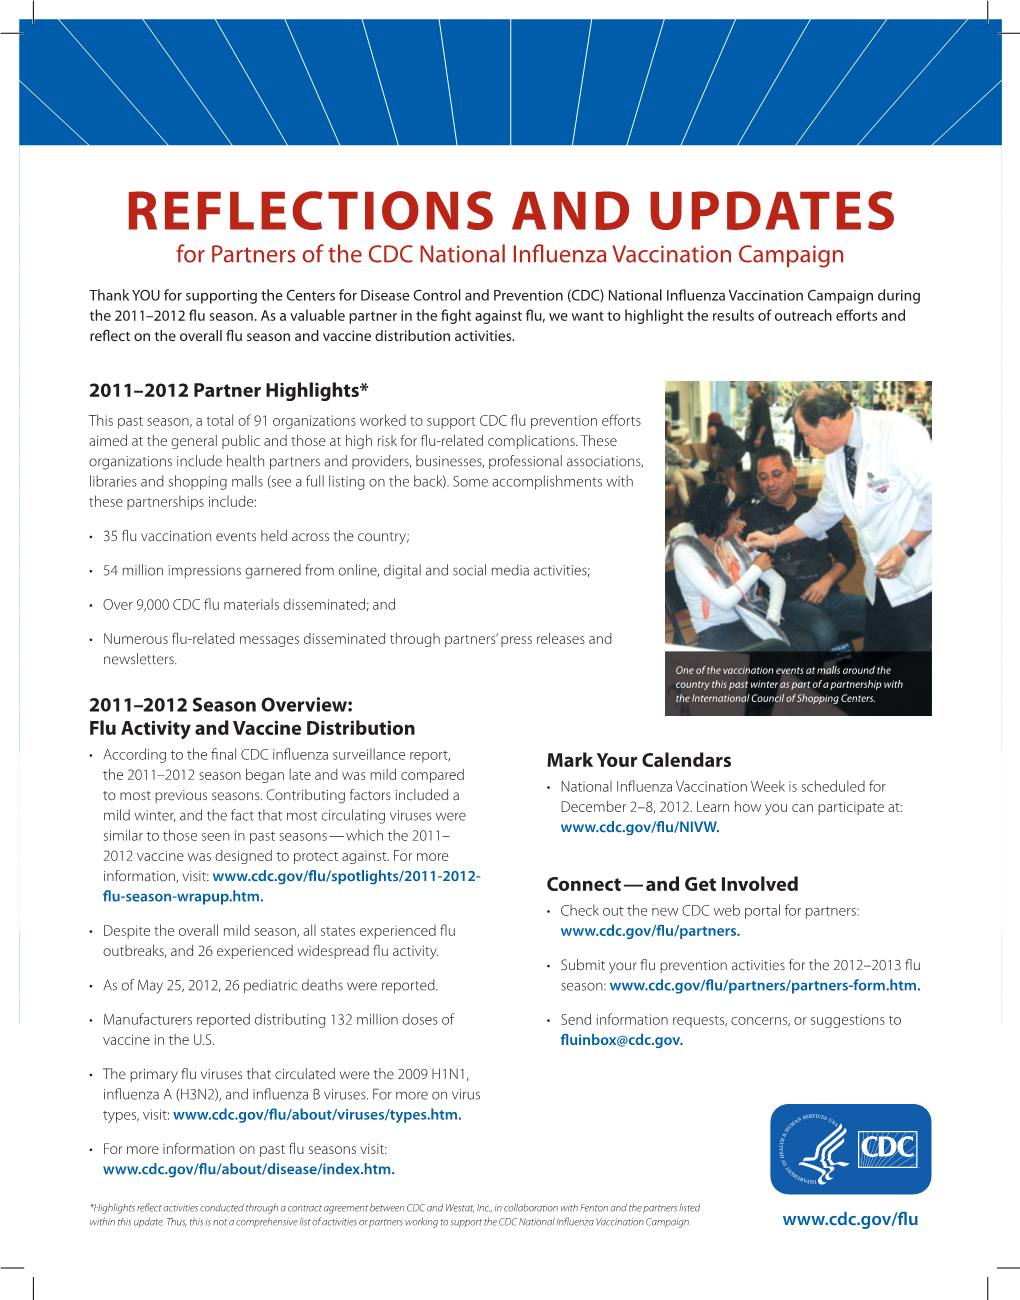 REFLECTIONS and UPDATES for Partners of the CDC National Influenza Vaccination Campaign